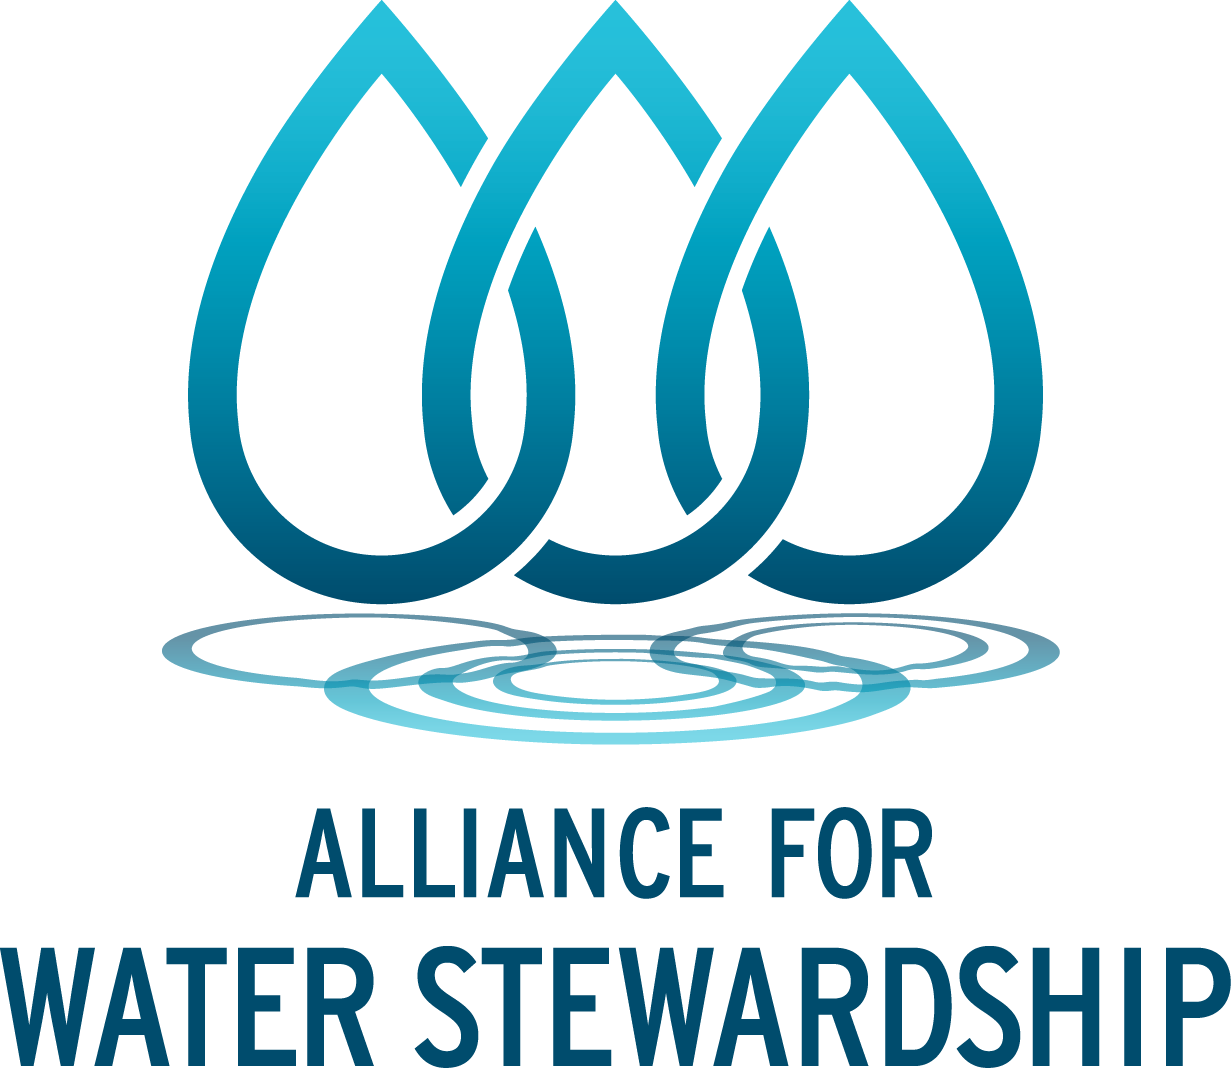 The Alliance for Water Stewardship Standard cover